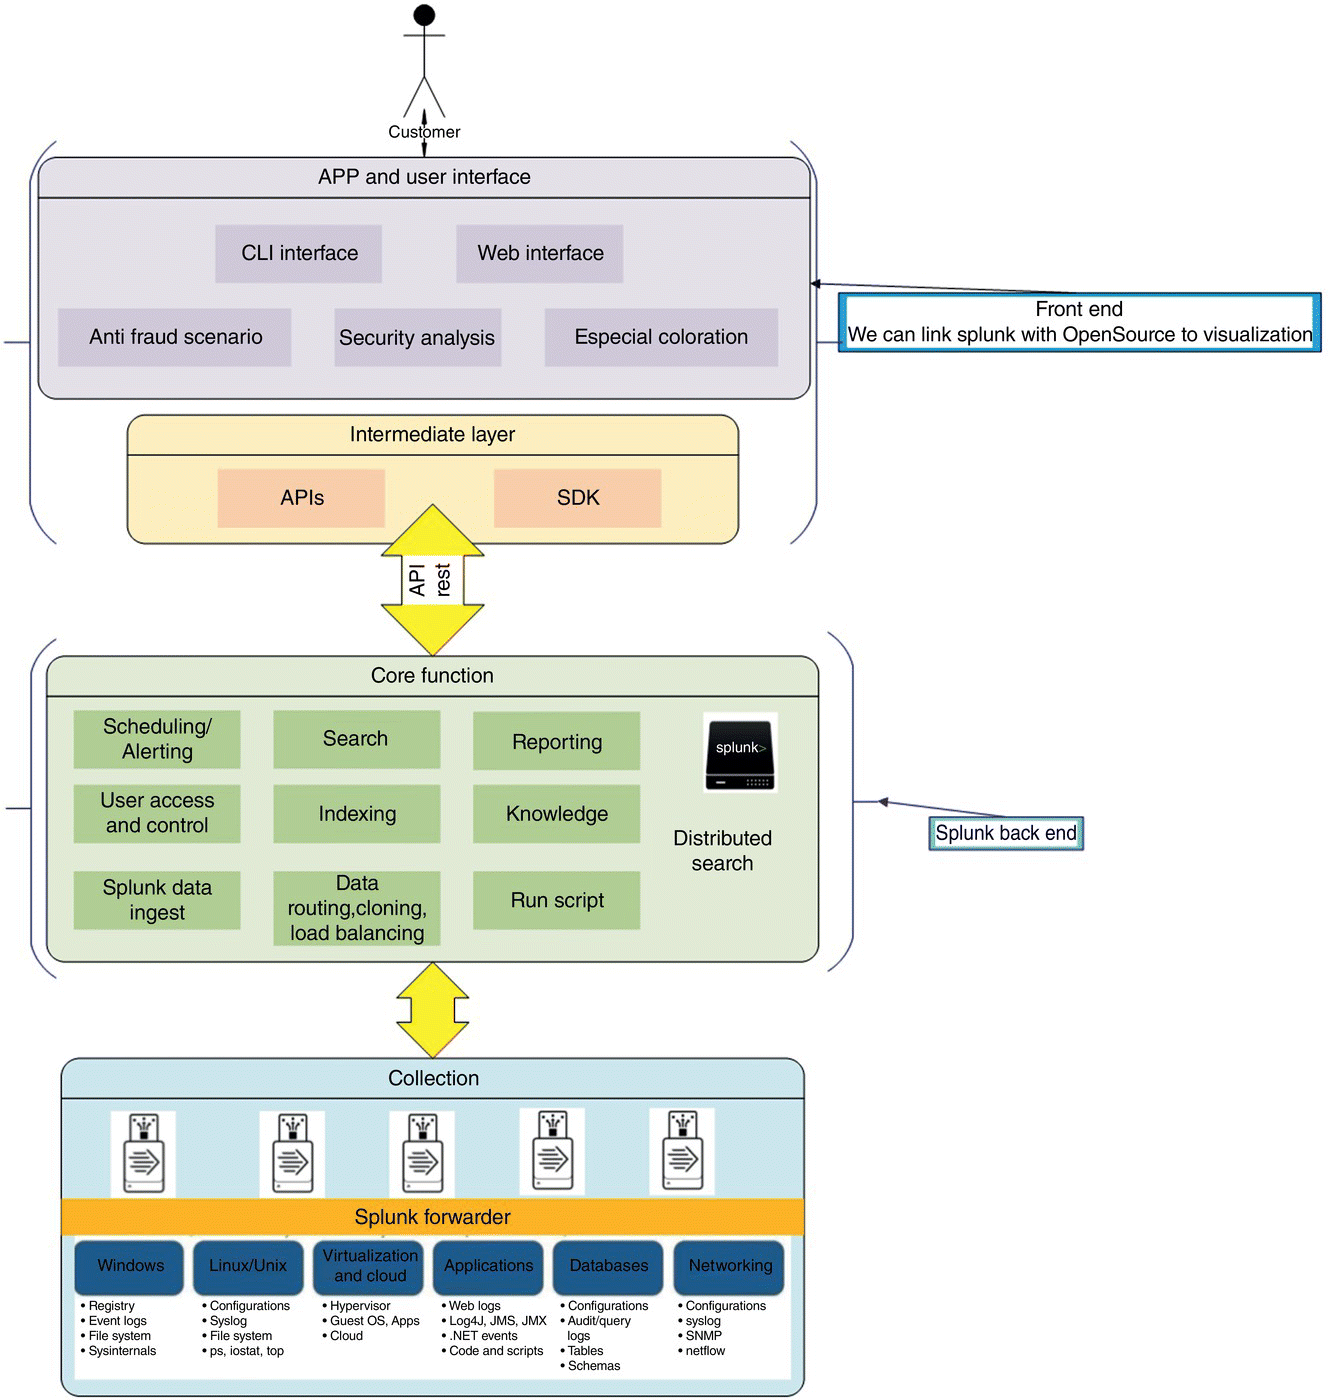 Schematic illustration of the Splunk front end and back end architecture for smart city data analytics.